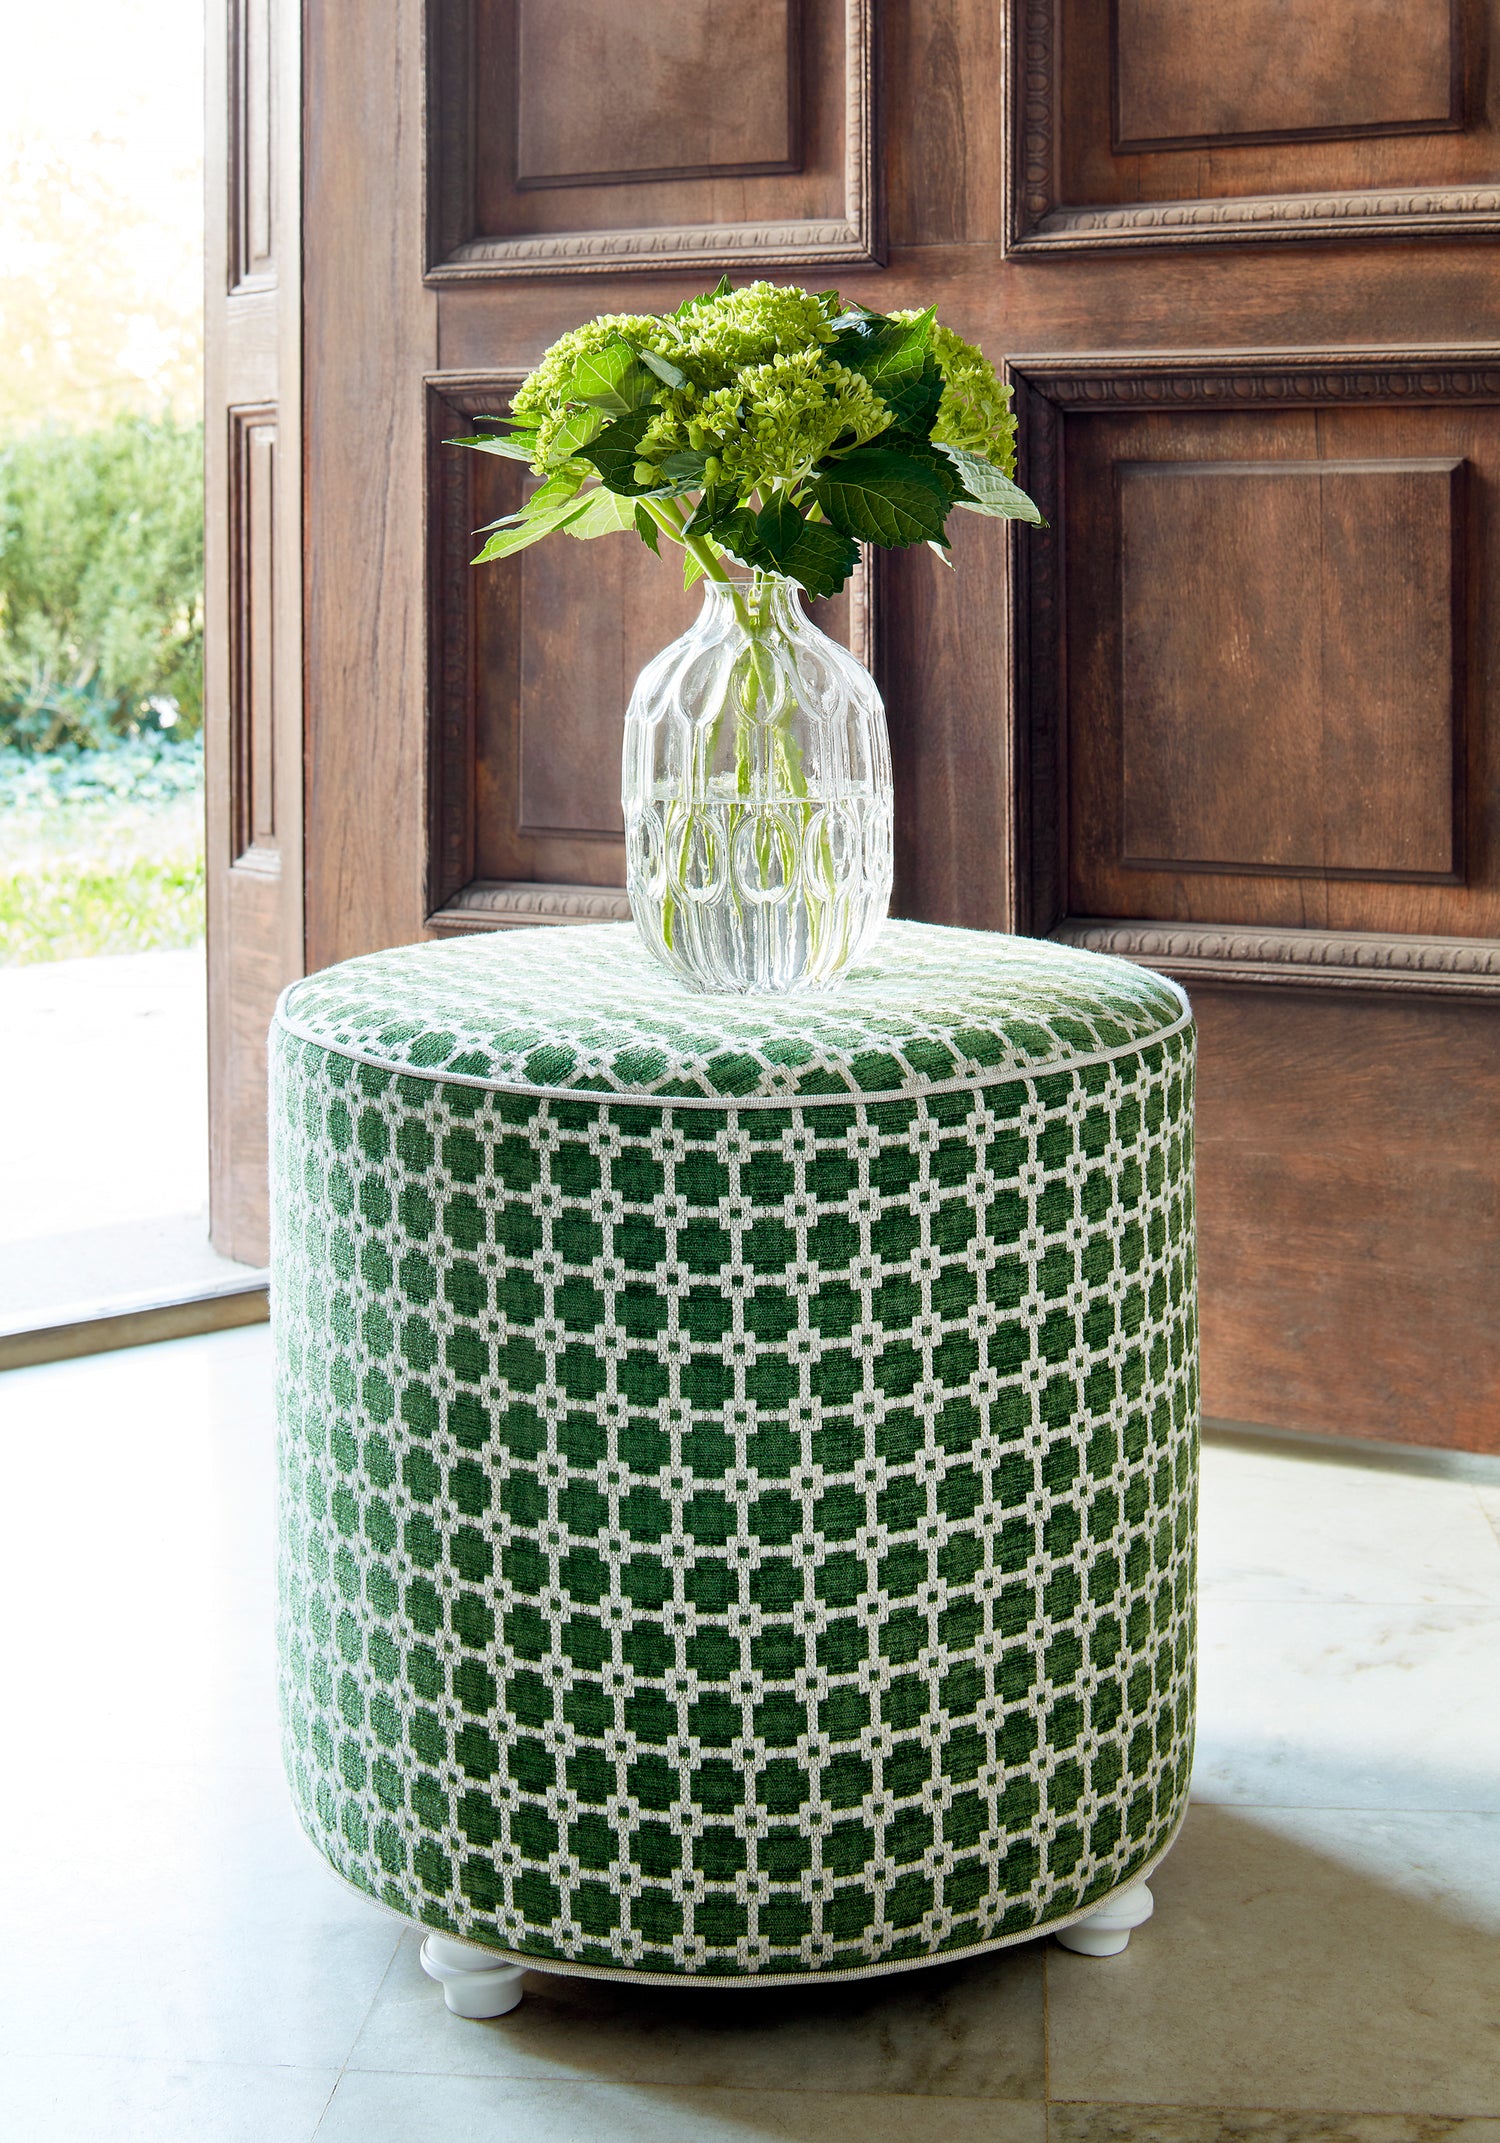 Roundabout Ottoman in Apollo woven fabric in emerald green color - pattern number W80718 - by Thibaut in the Woven Resource Vol 11 Rialto collection